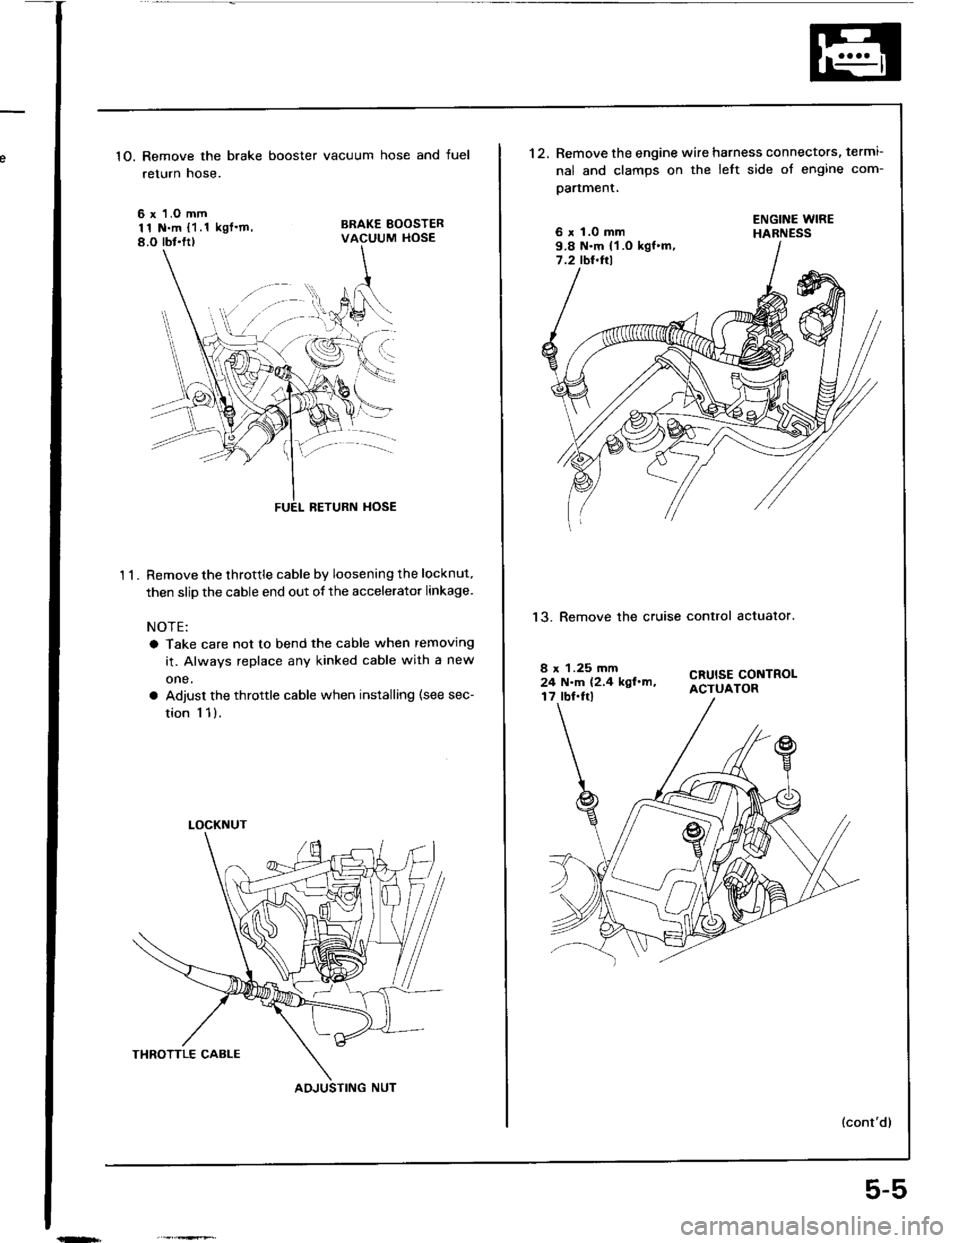 HONDA INTEGRA 1994 4.G Workshop Manual 1O. Remove the brake booster vacuum hose and fuel
return hose.
6 x 1.O mm11 N.m {1.1 kglm,8.O rbt.ltl
BRAKE BOOSTERVACUUM HOSE
t 1.
BETURN HOSE
Remove the throttle cable by loosening the locknut.
th